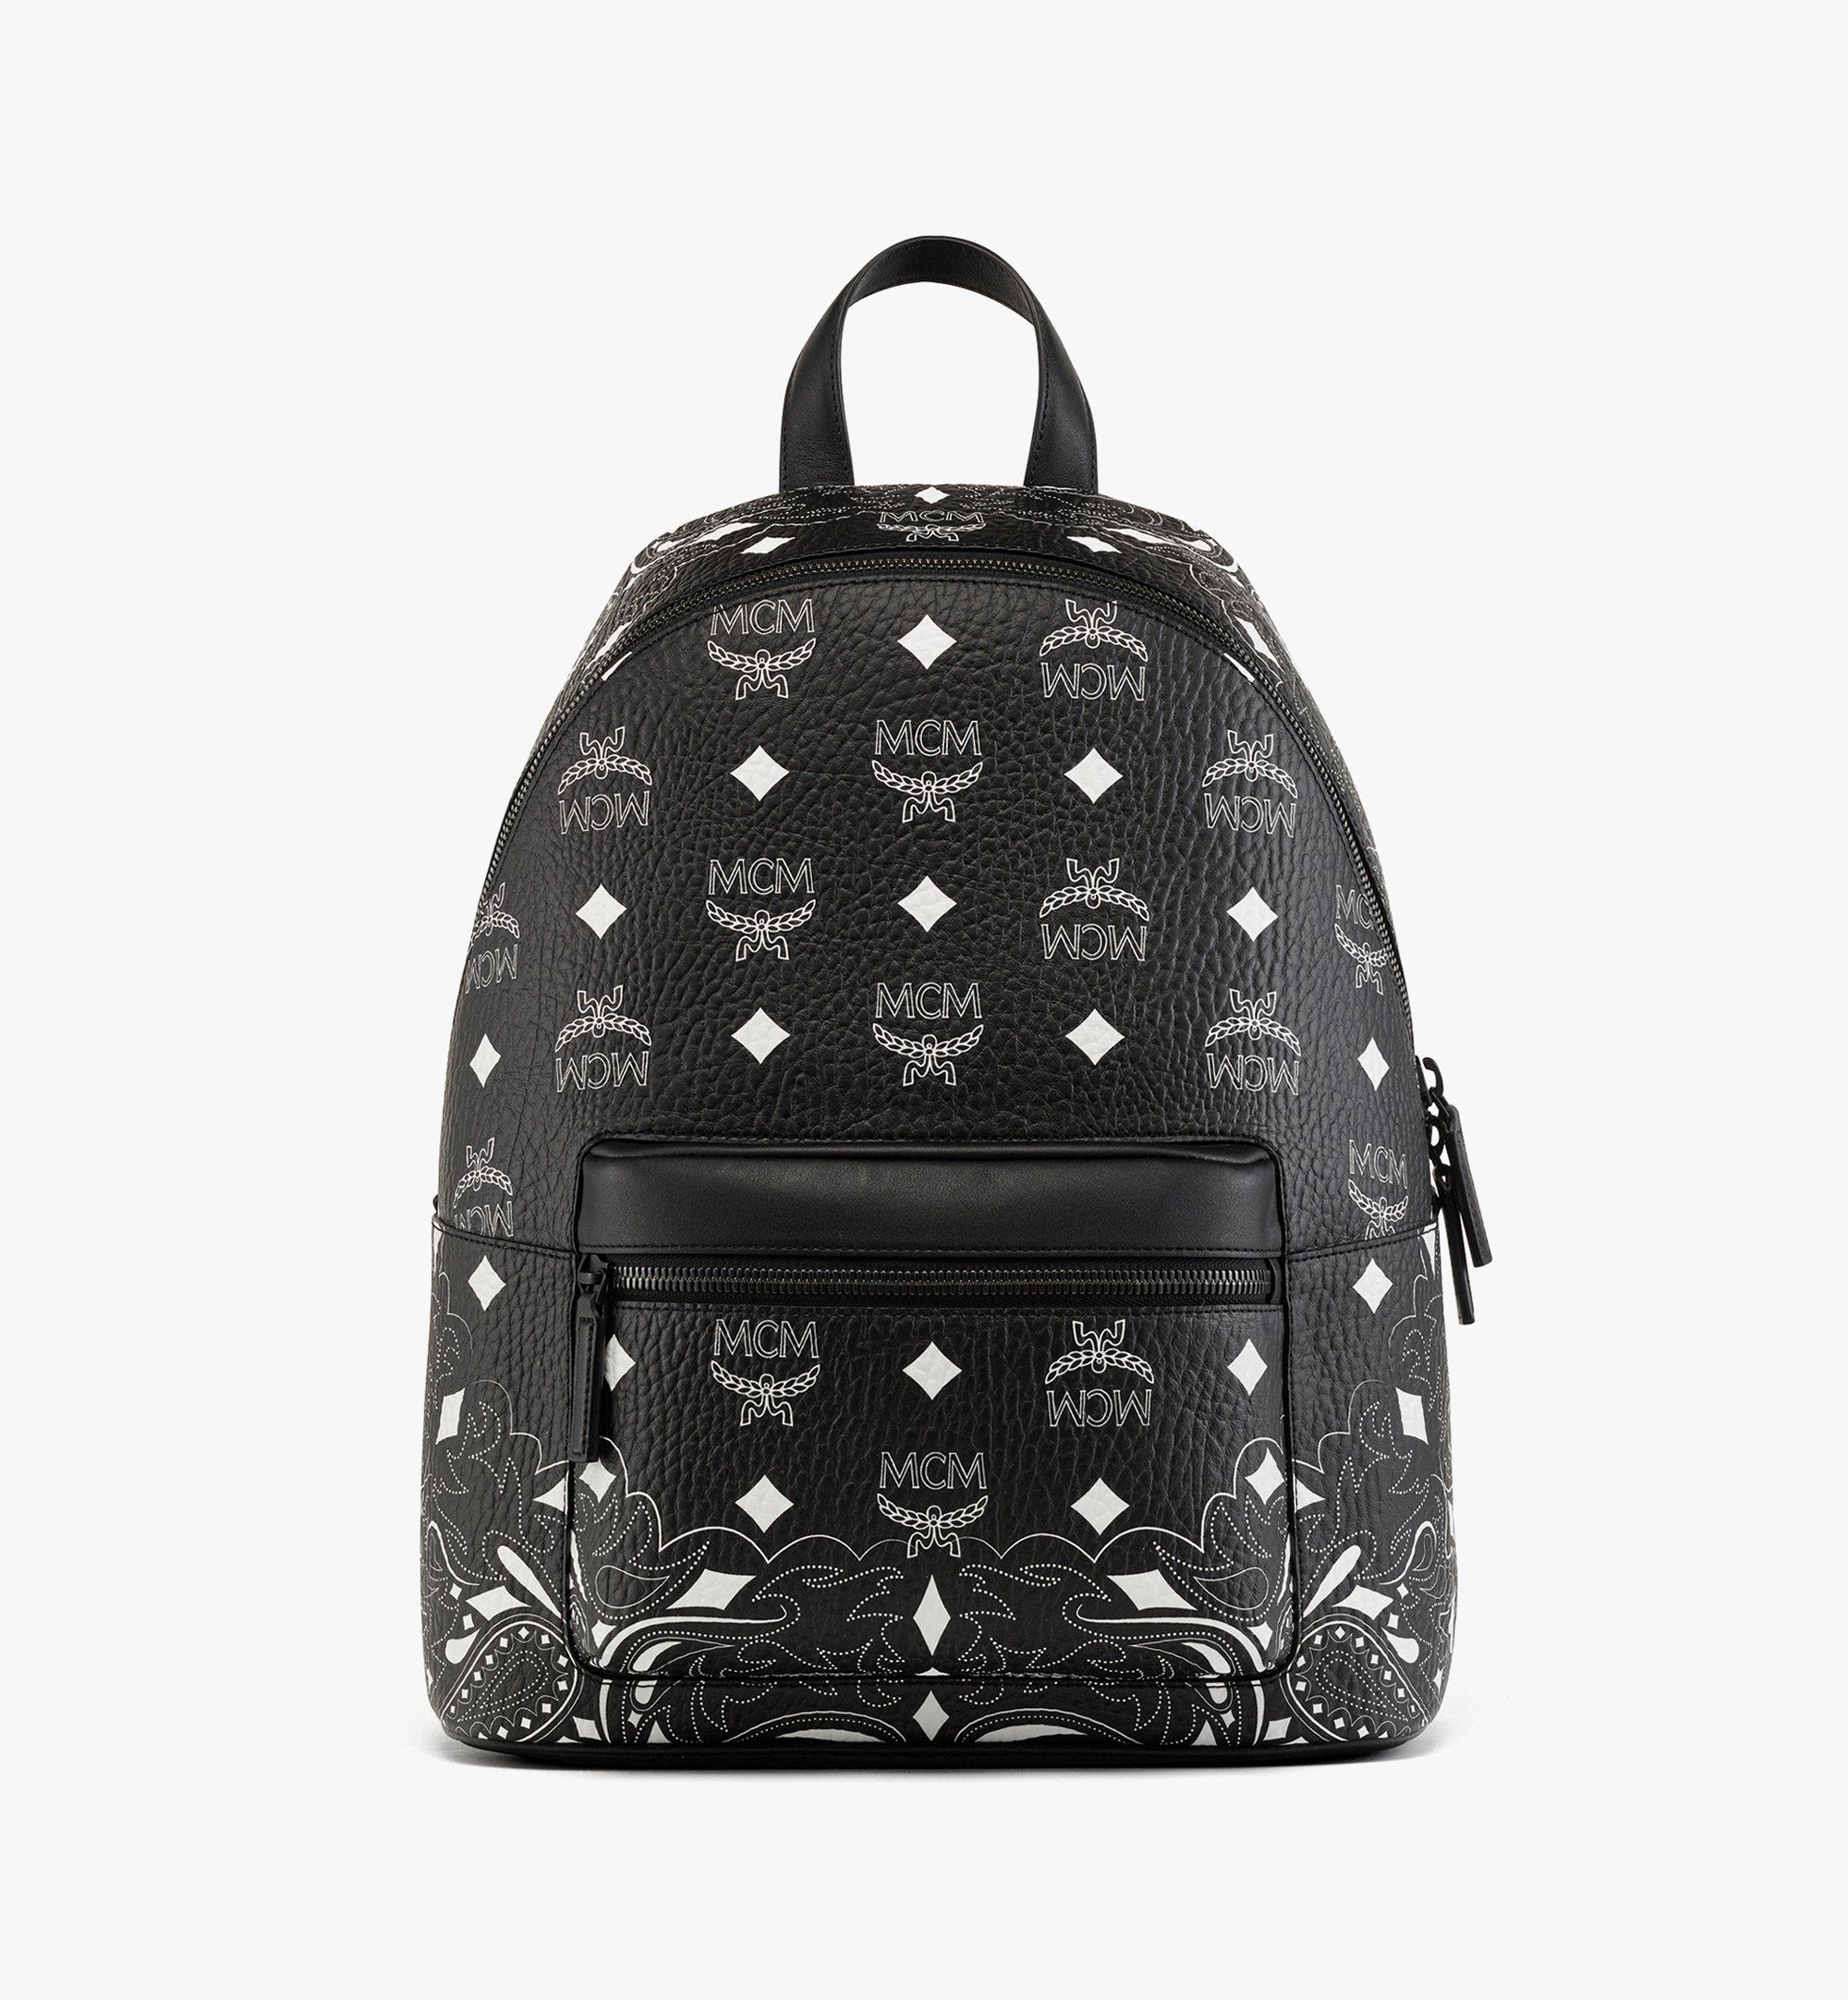 Black And White Outfit With MCM Backpack - Your Average Guy